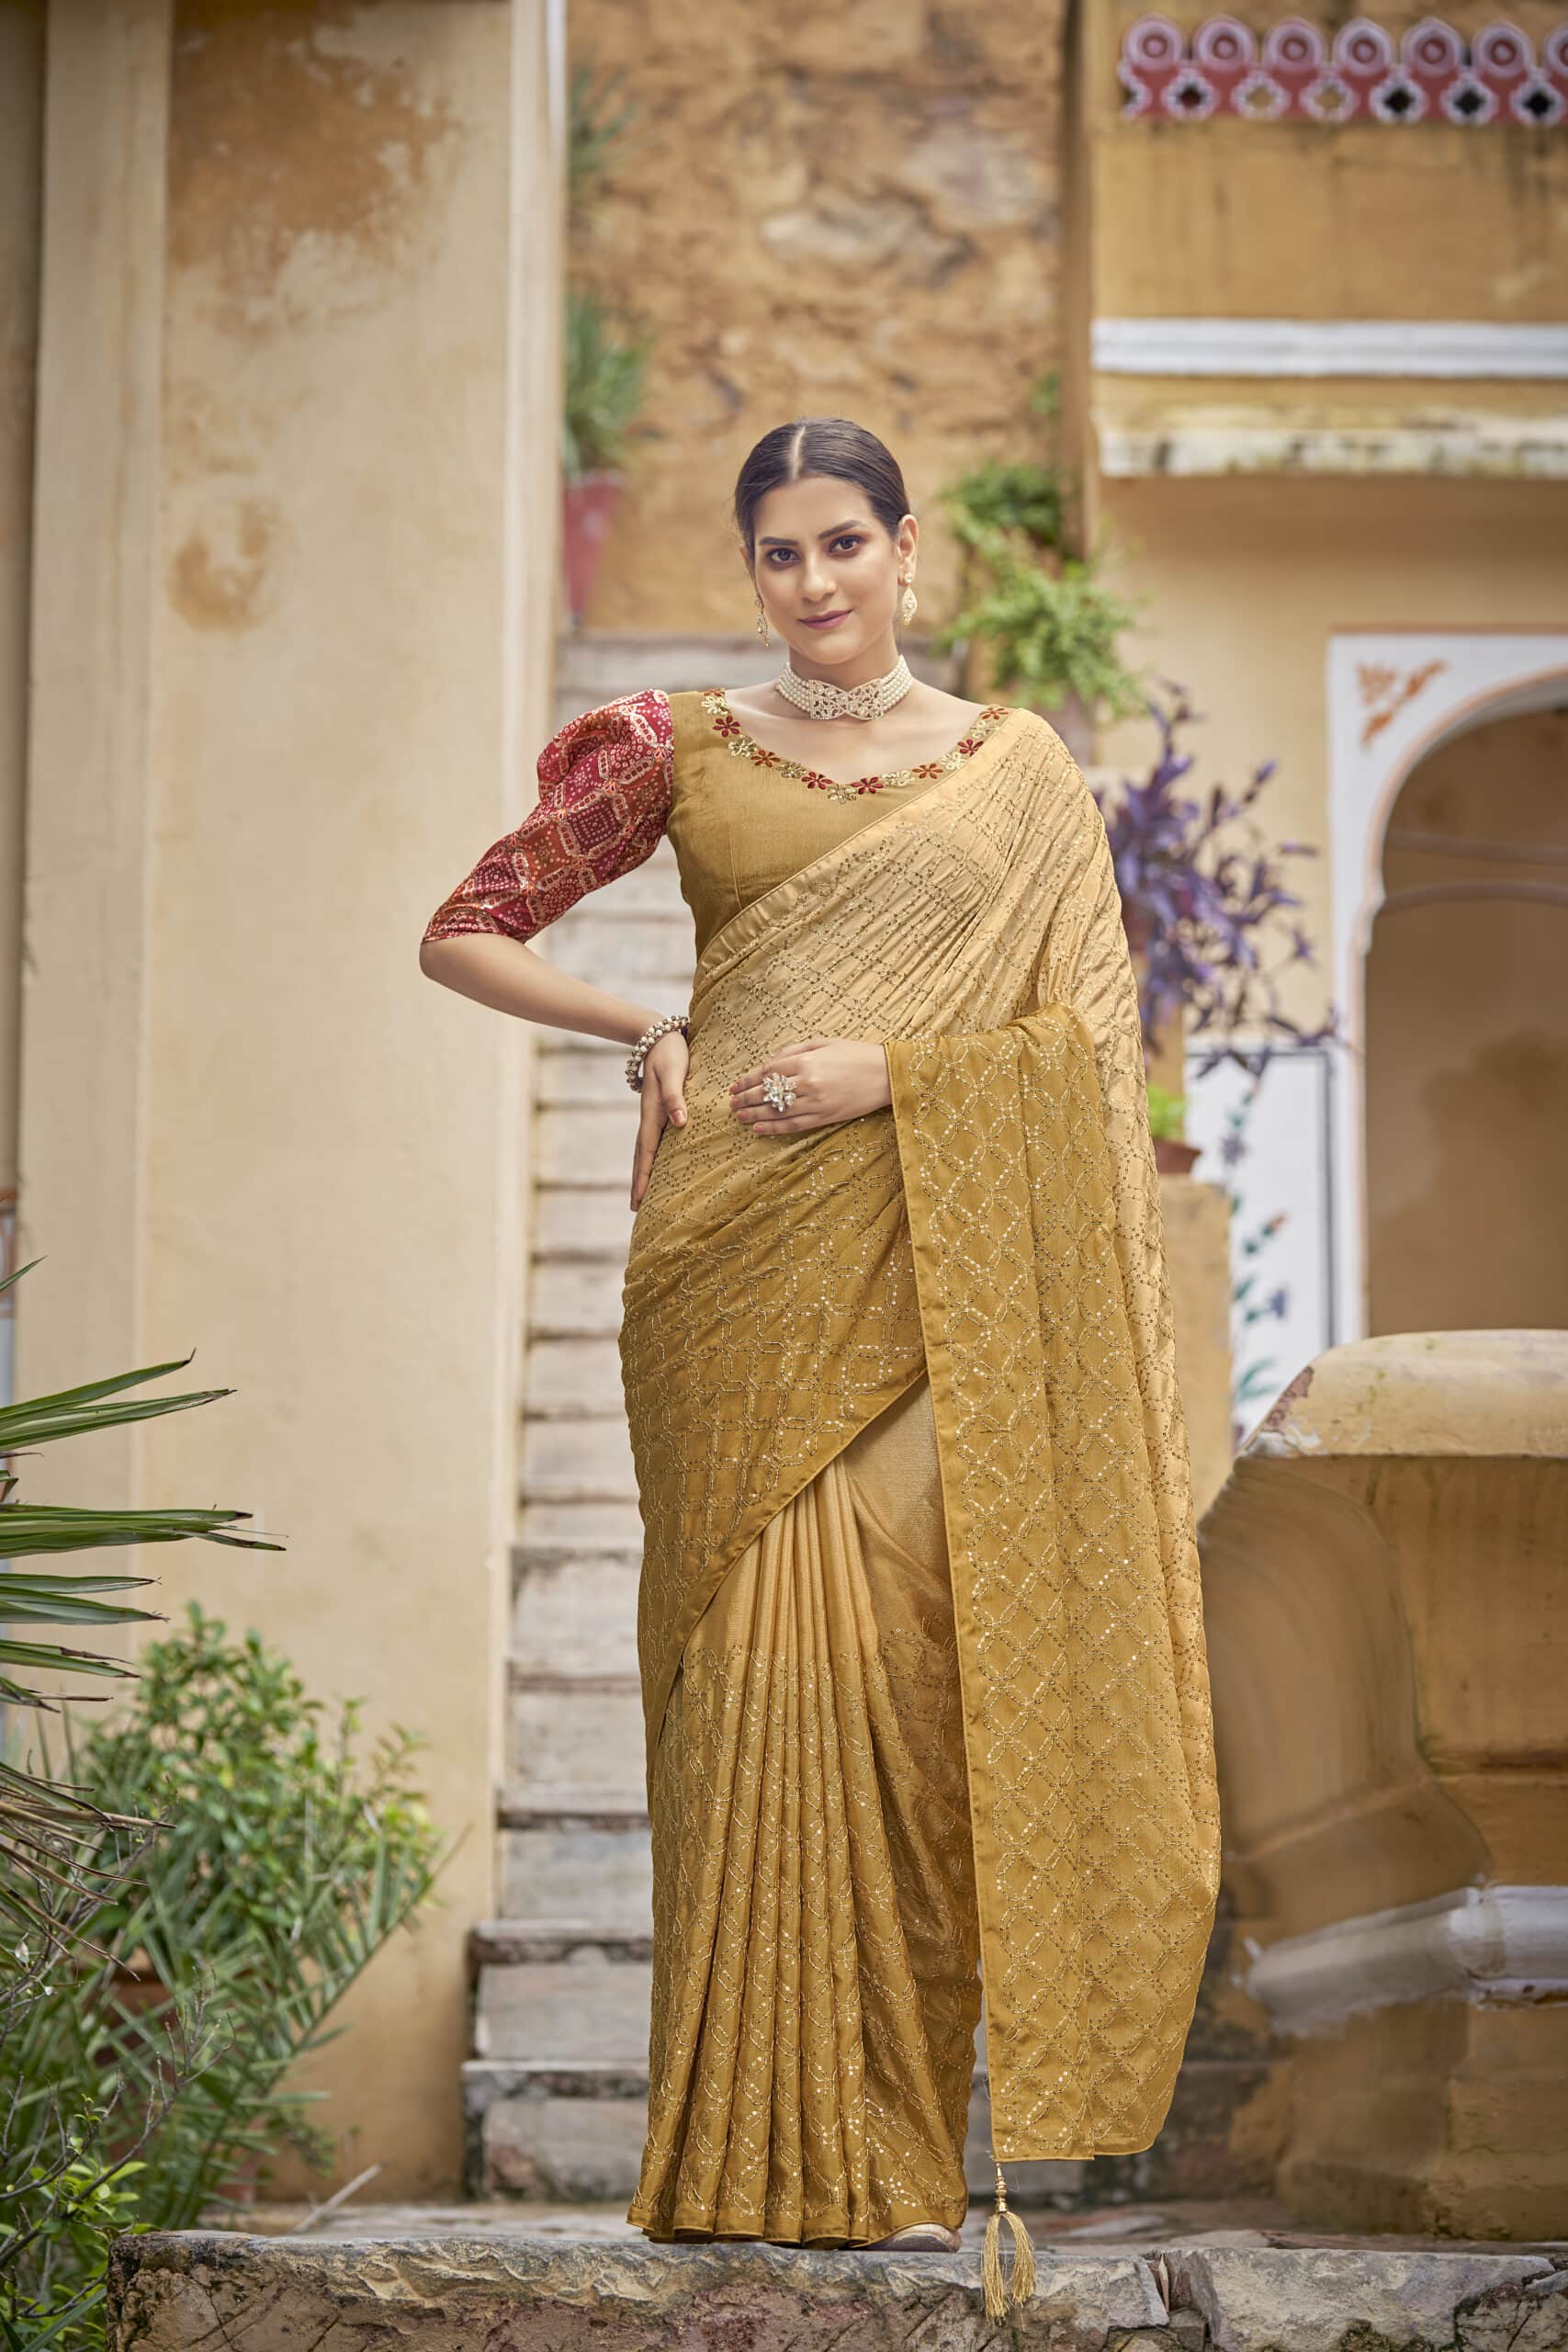 Which colour matches a yellow saree blouse? - Quora